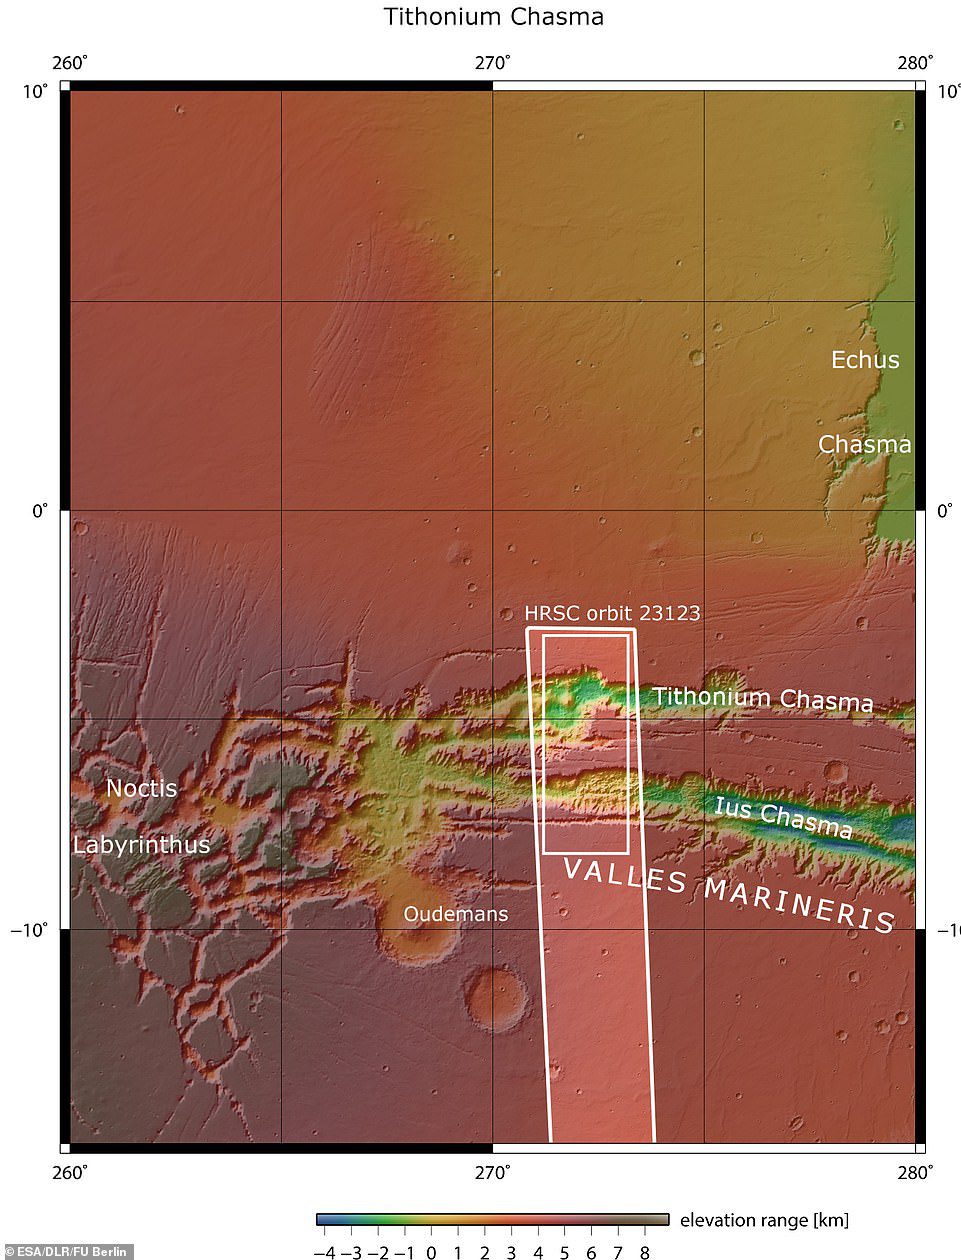 Lus and Tithonium Chasmata are seen above.  The area outlined in the dark white box indicates the area imaged by the Mars Express High Resolution stereo camera on April 21, 2022 during orbit.